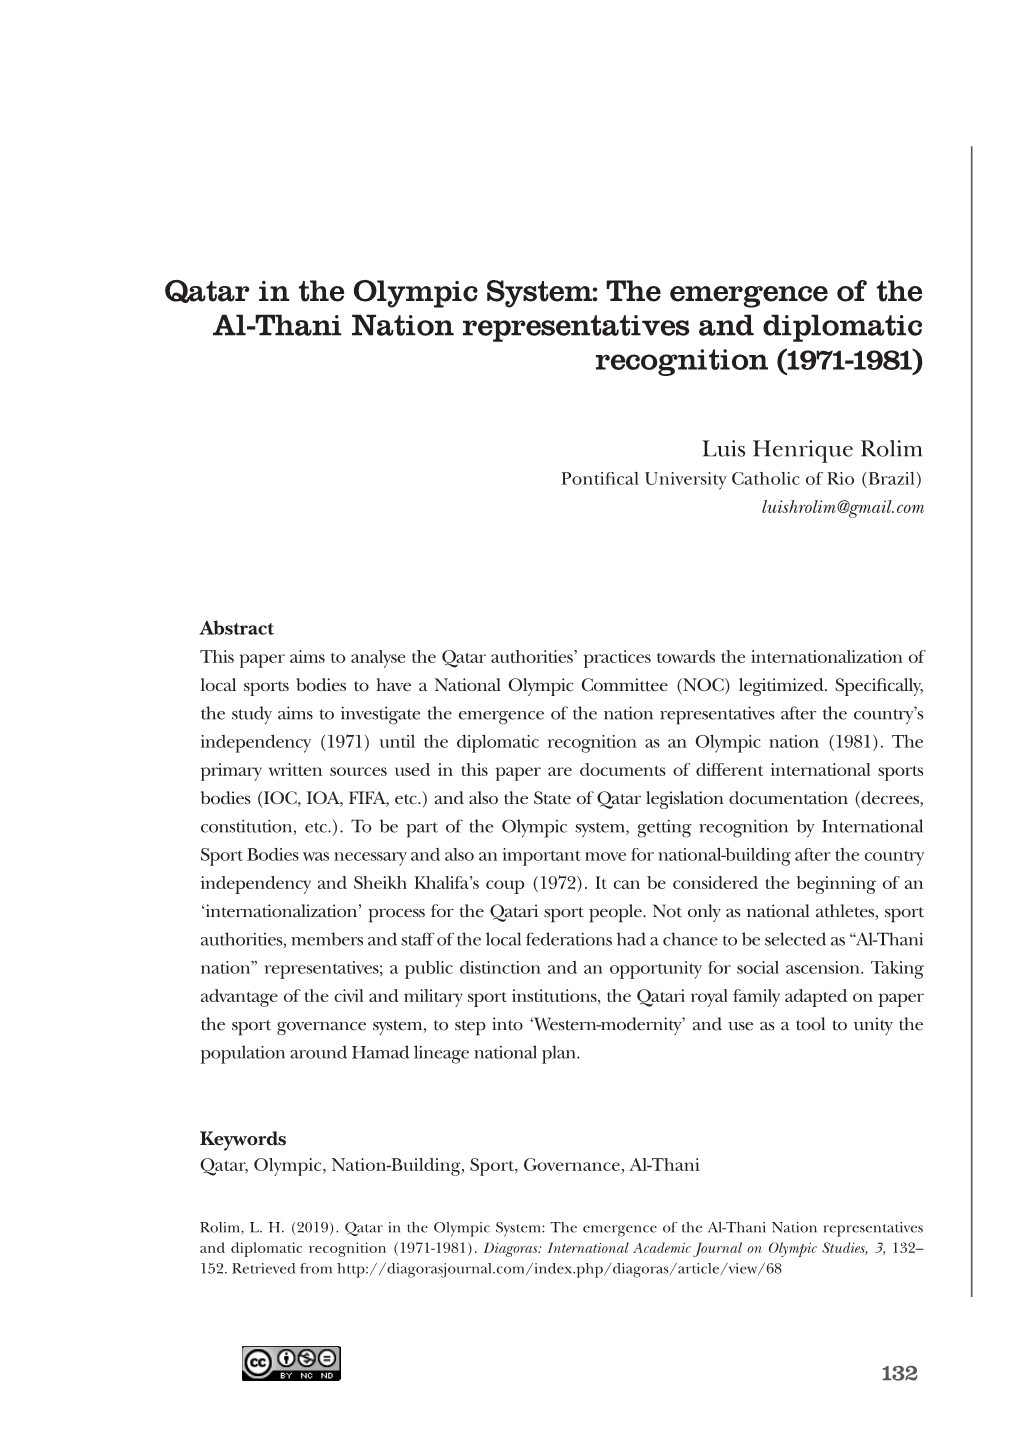 Qatar in the Olympic System: the Emergence of the Al-Thani Nation Representatives and Diplomatic Recognition (1971-1981)